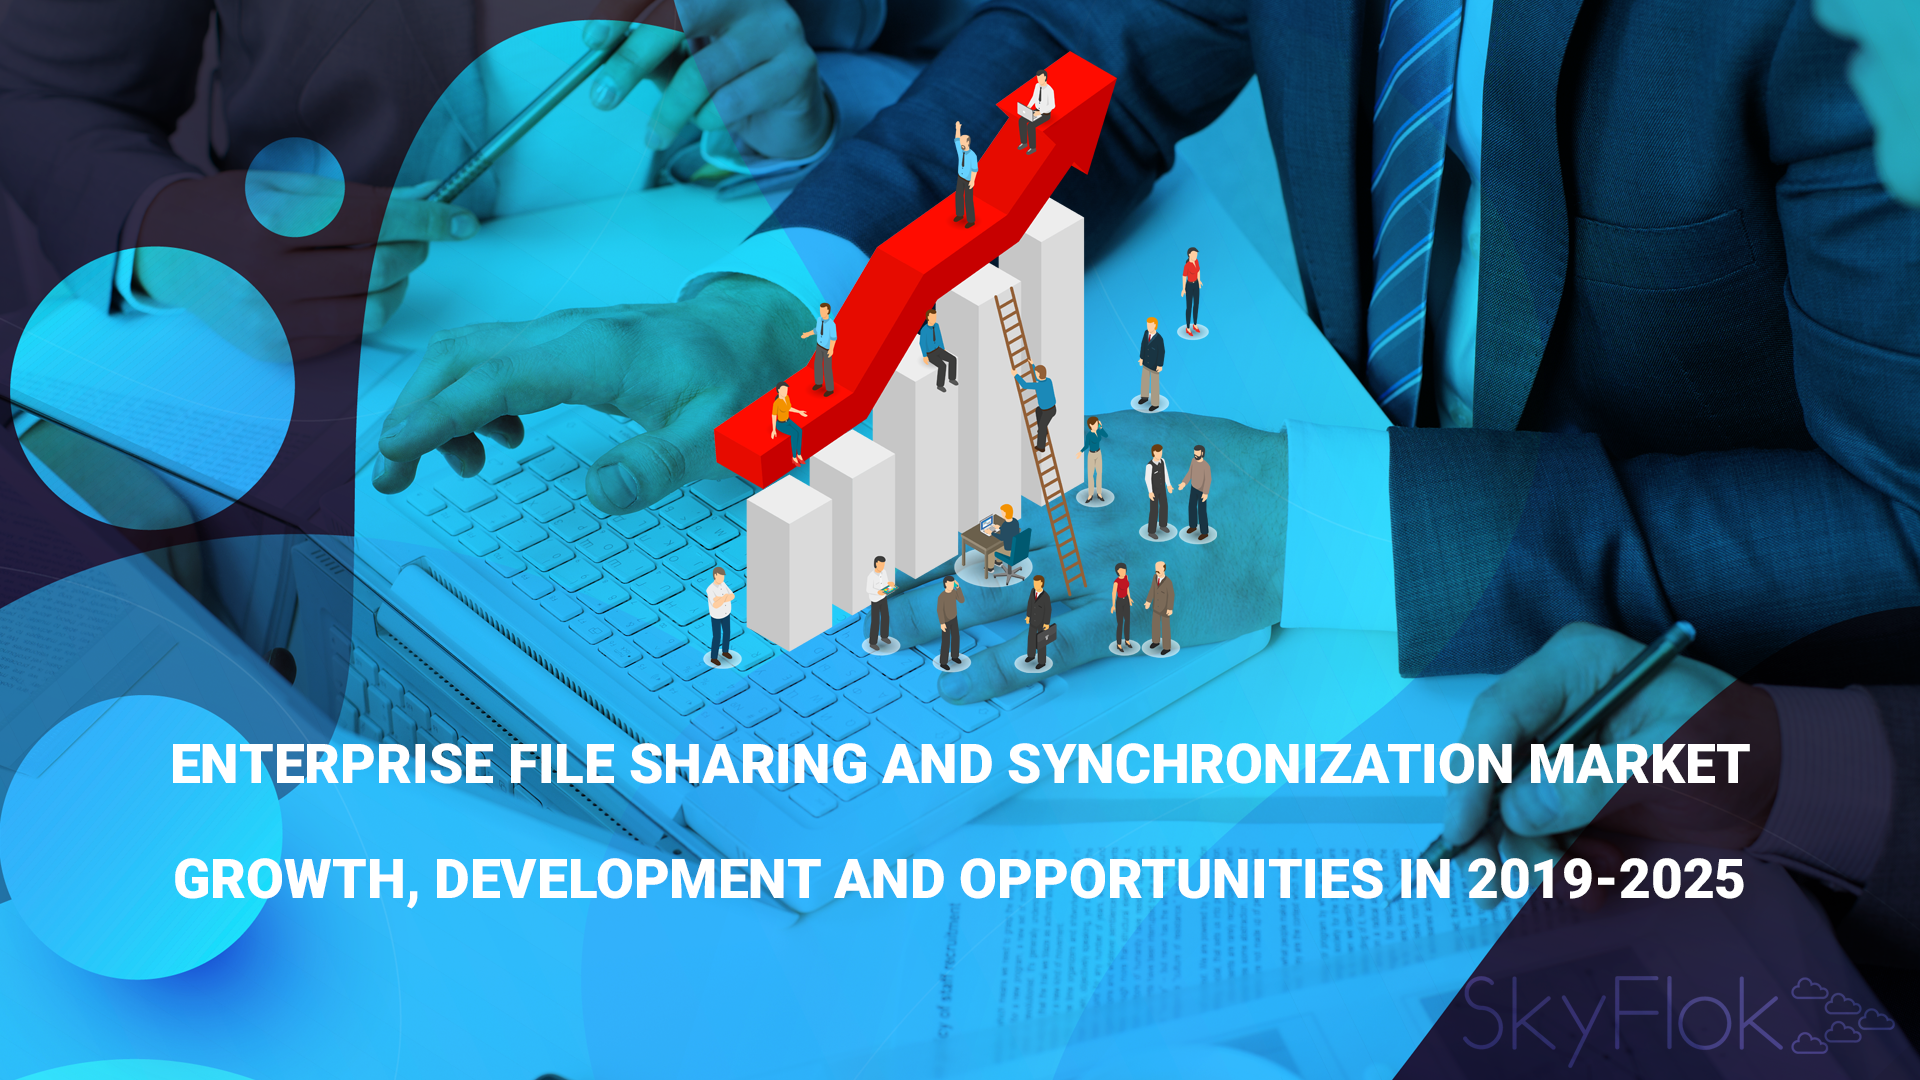 Enterprise File Sharing and Synchronization Market Growth, Development and Opportunities in 2019-2025